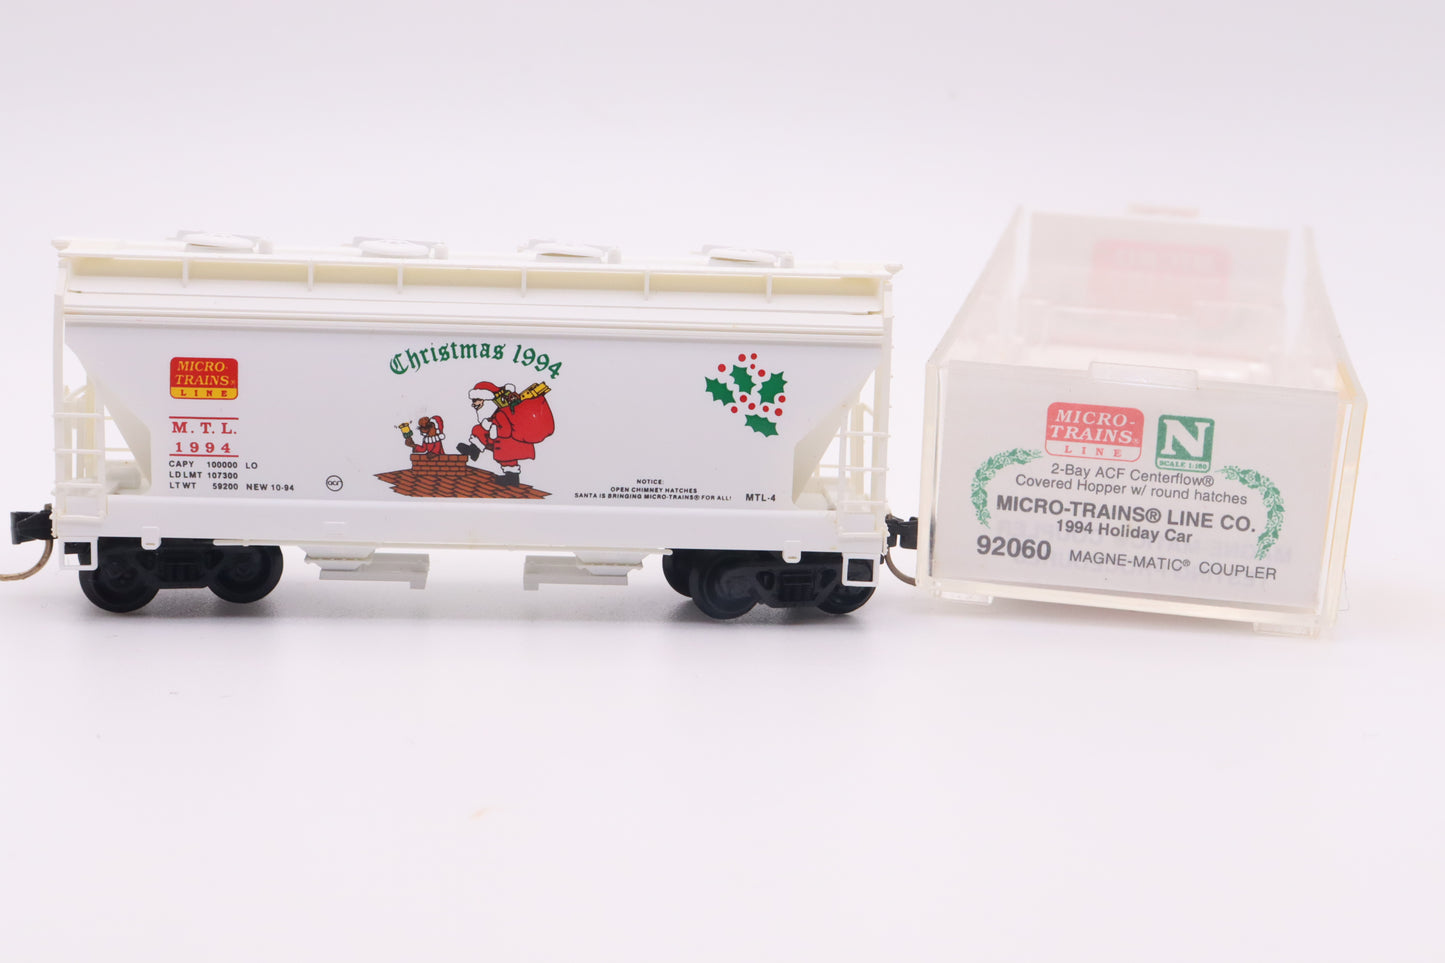 MTL-92060 - 2-Bay ACF Centerflow Covered Hopper w/ Round Hatches - Micro-Trains Holiday Car - MTL-1994